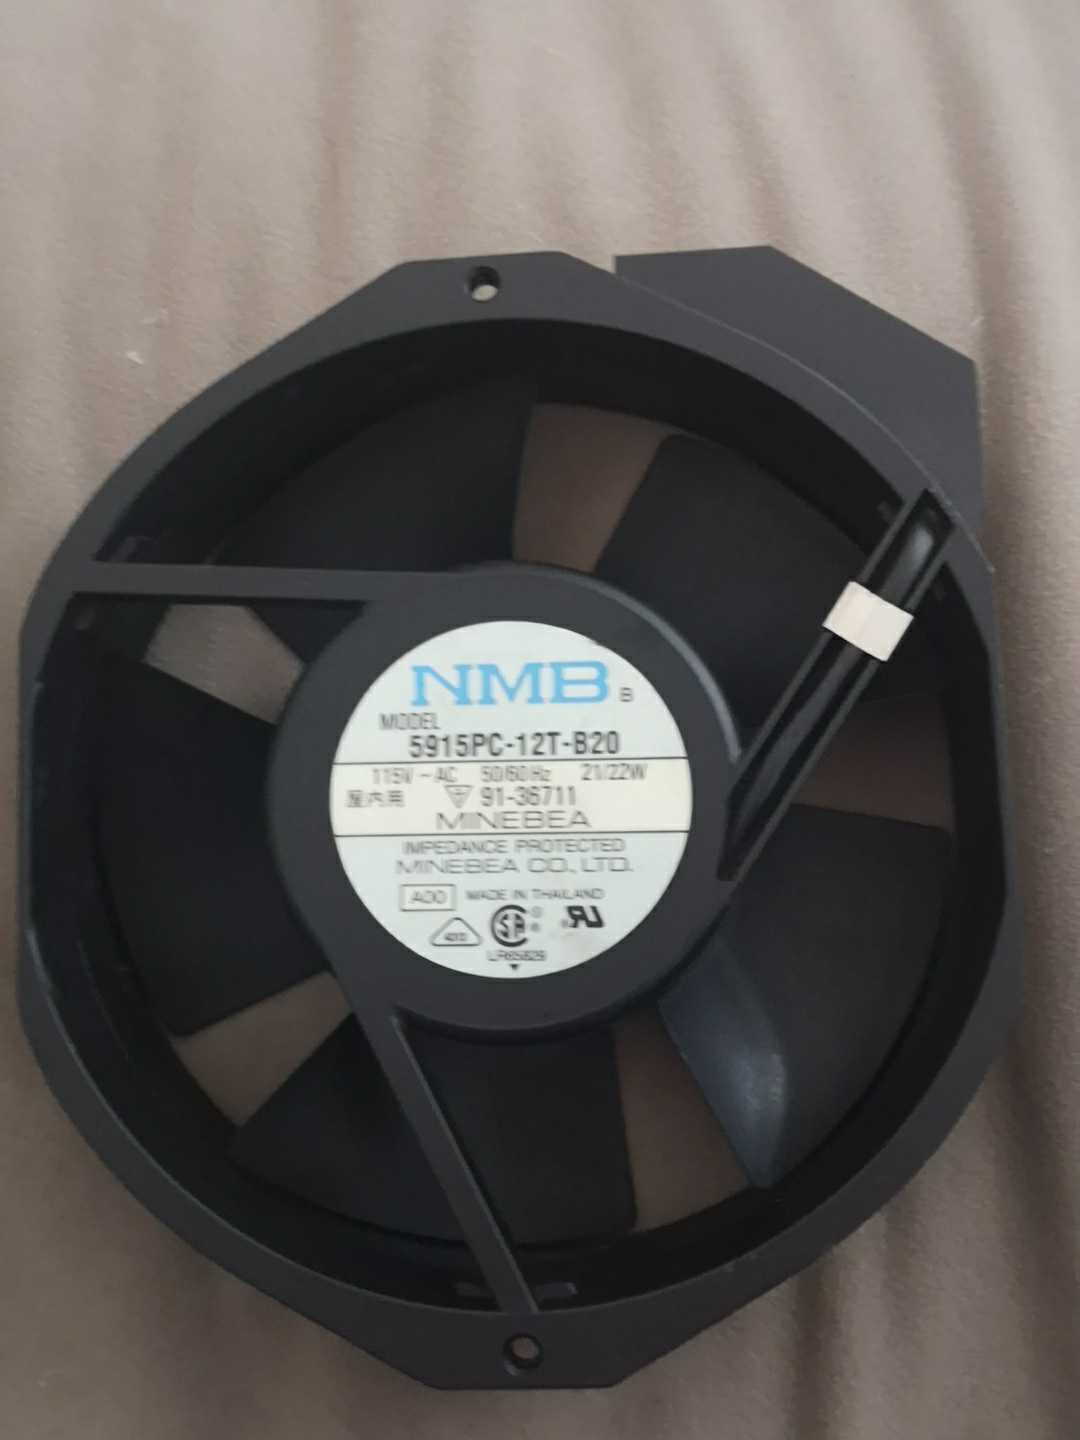 Manufacturer direct delivery 1pcs NMB 5915PC-12T-B20 5 ☆ popular 115V 21 22W chassis 172 c 38mm 150